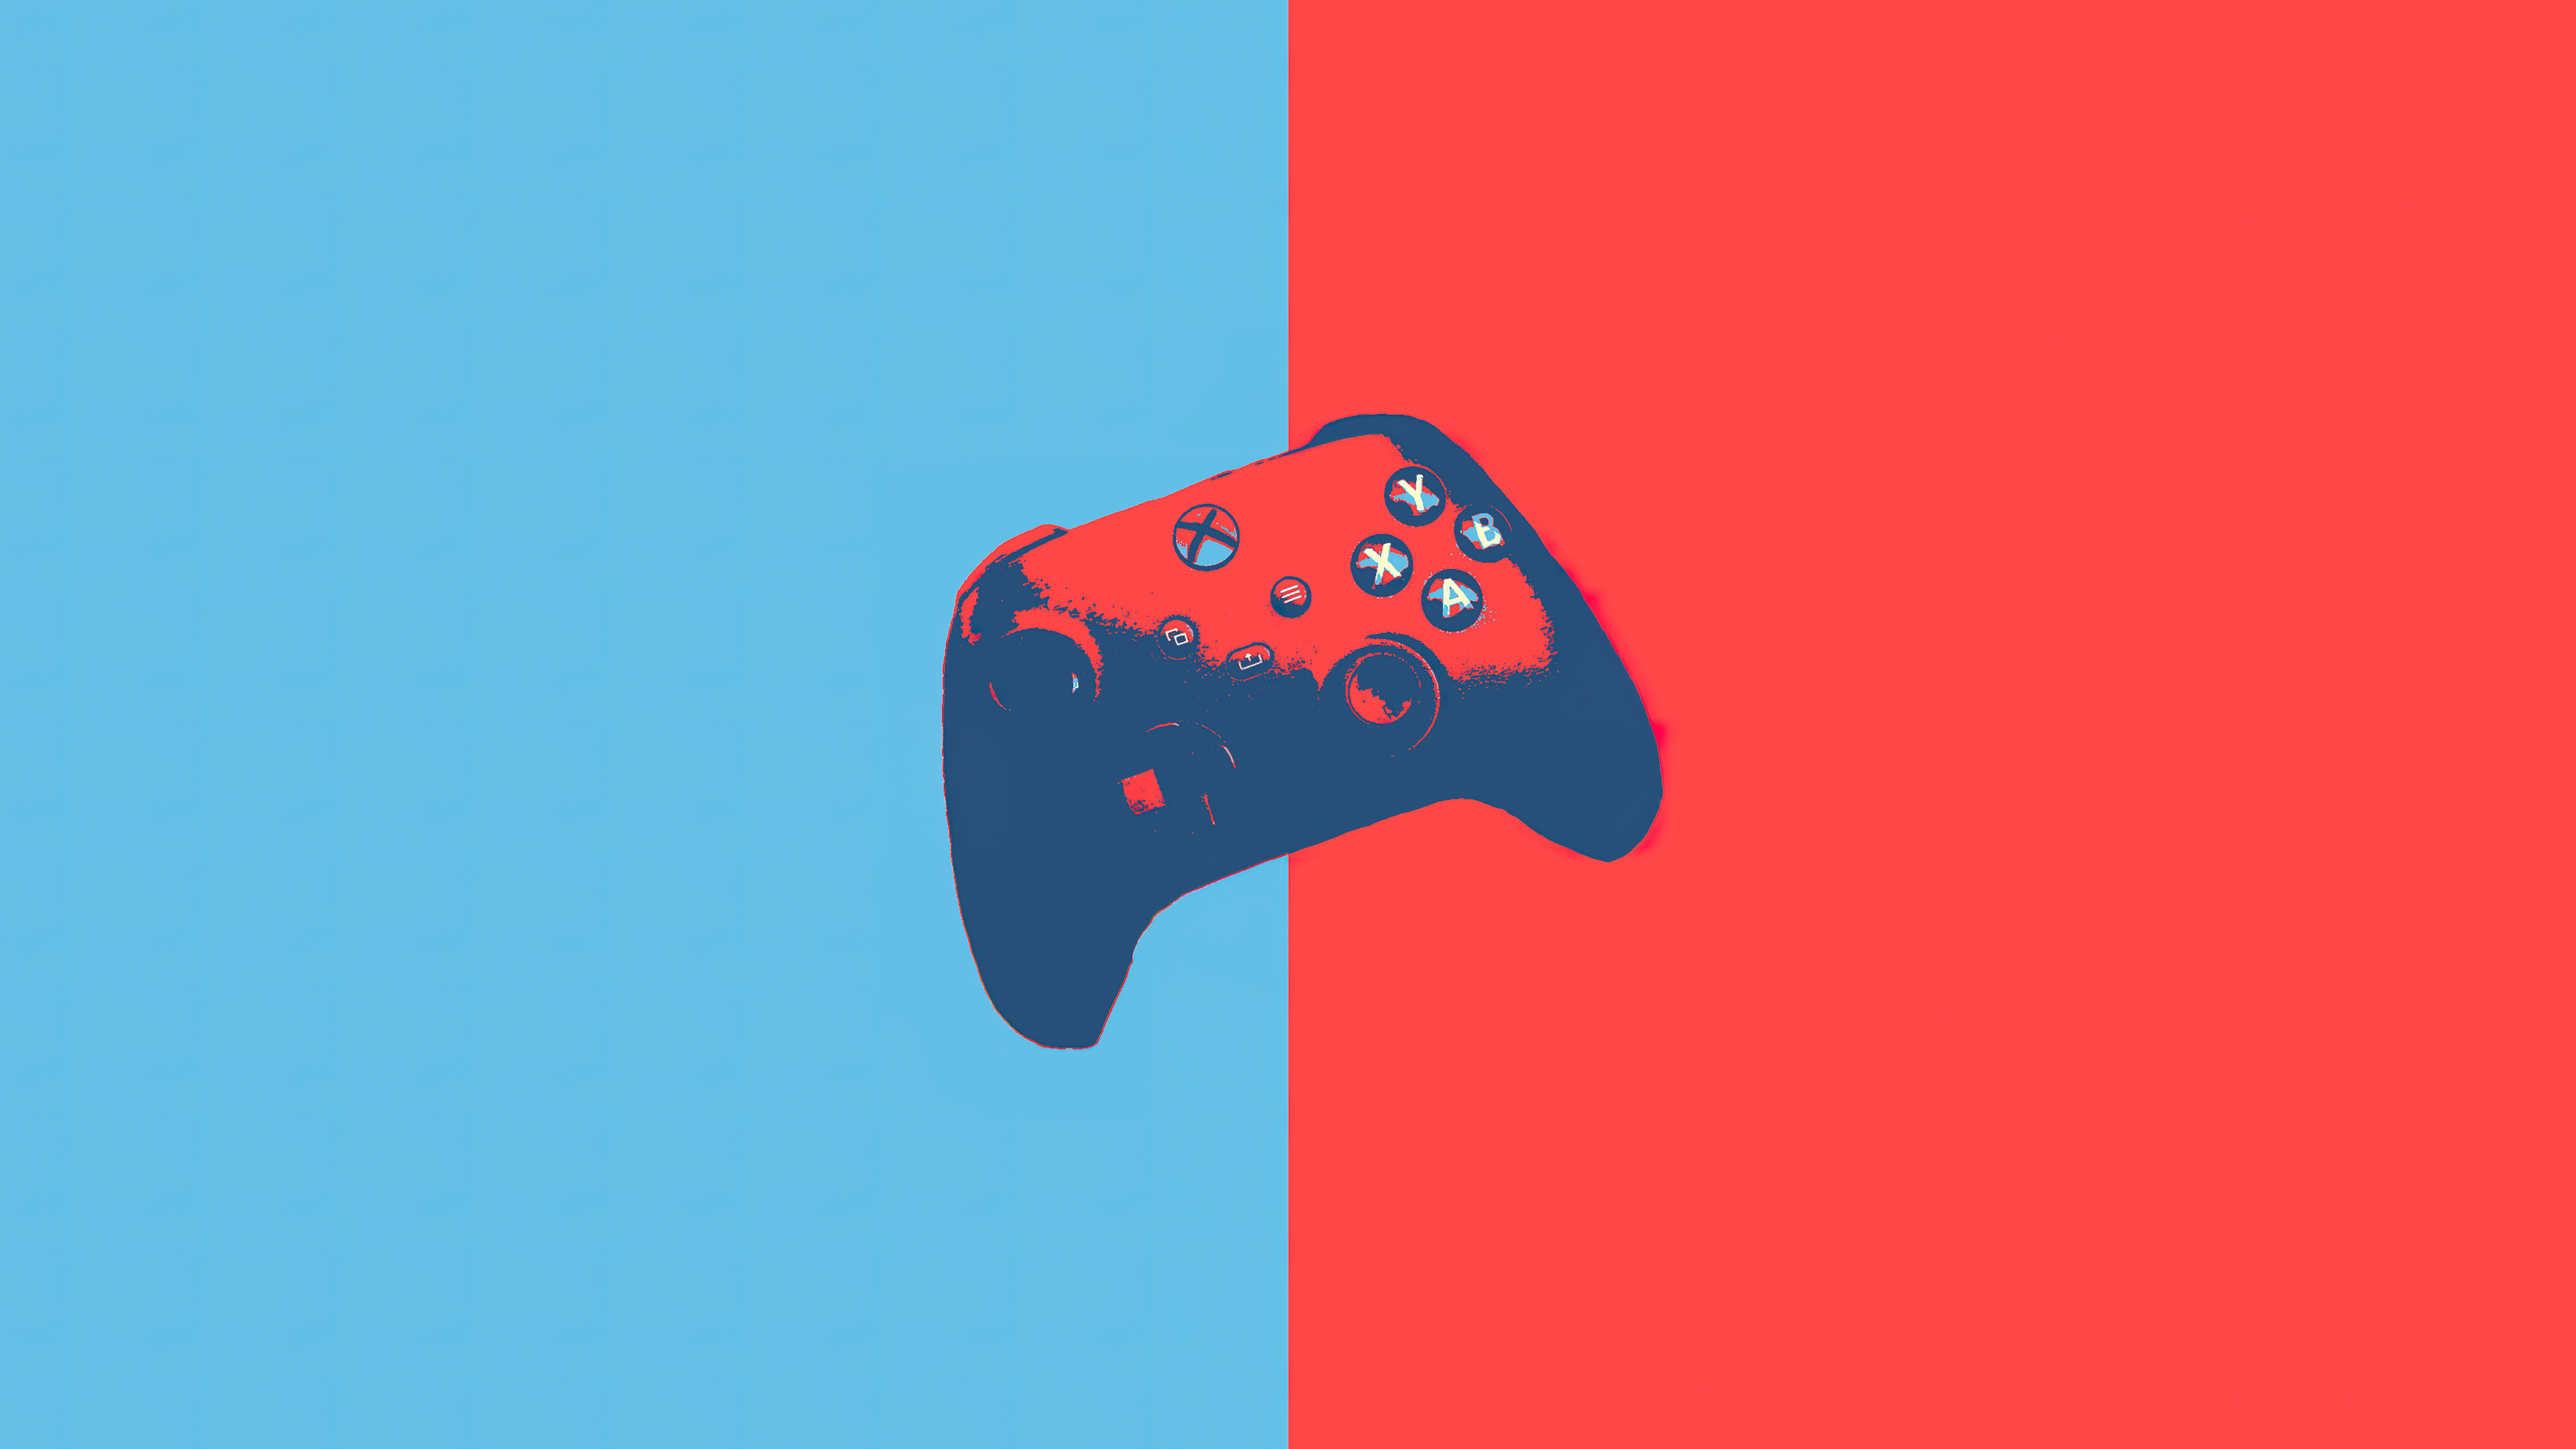 General 3840x2160 Xbox controllers digital art simple background two tone minimalism